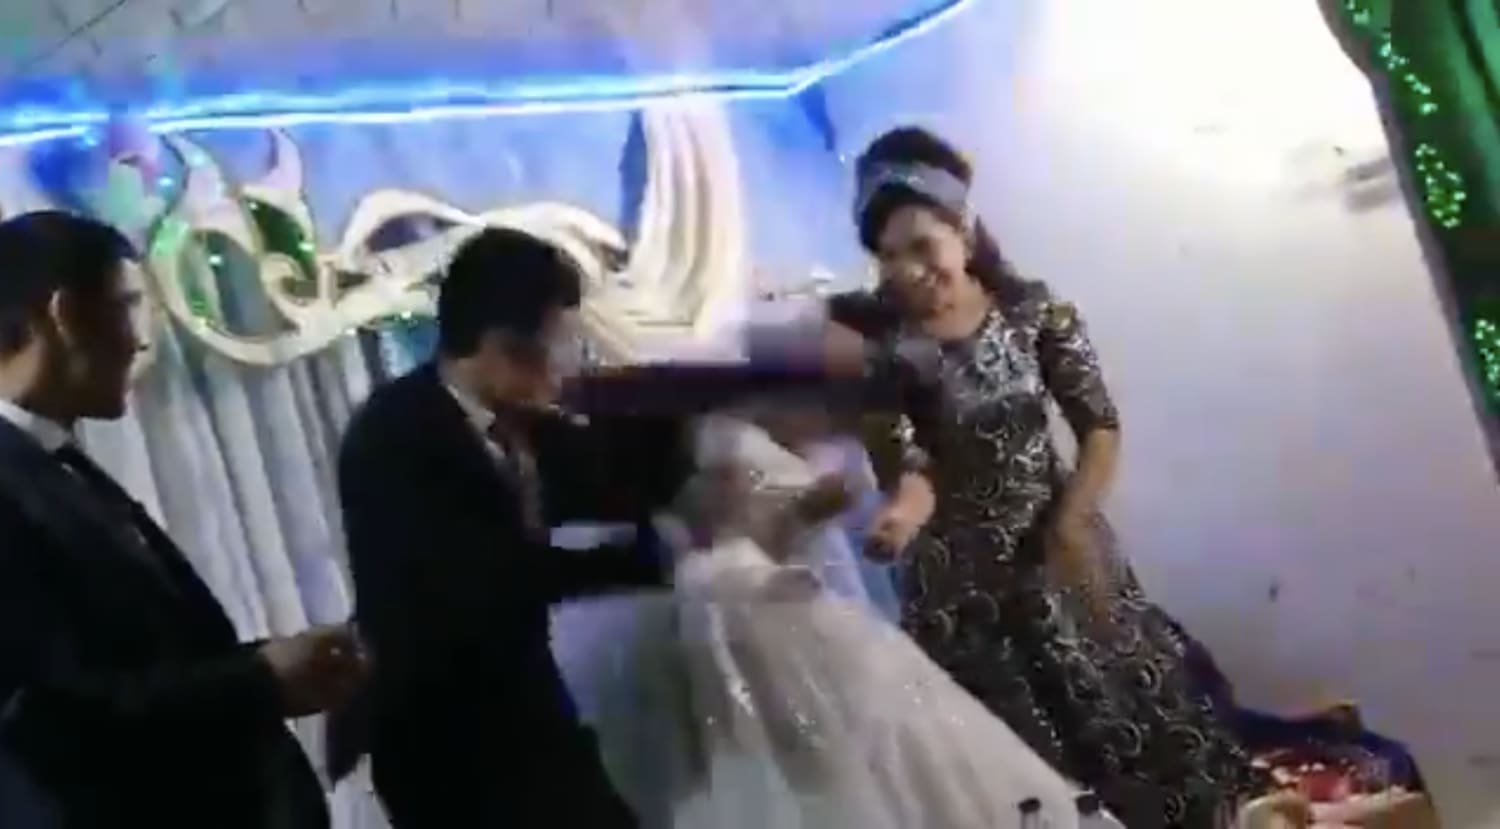 In a video posted on Twitter, a groom hits his new bride after losing to her in a game at their wedding.